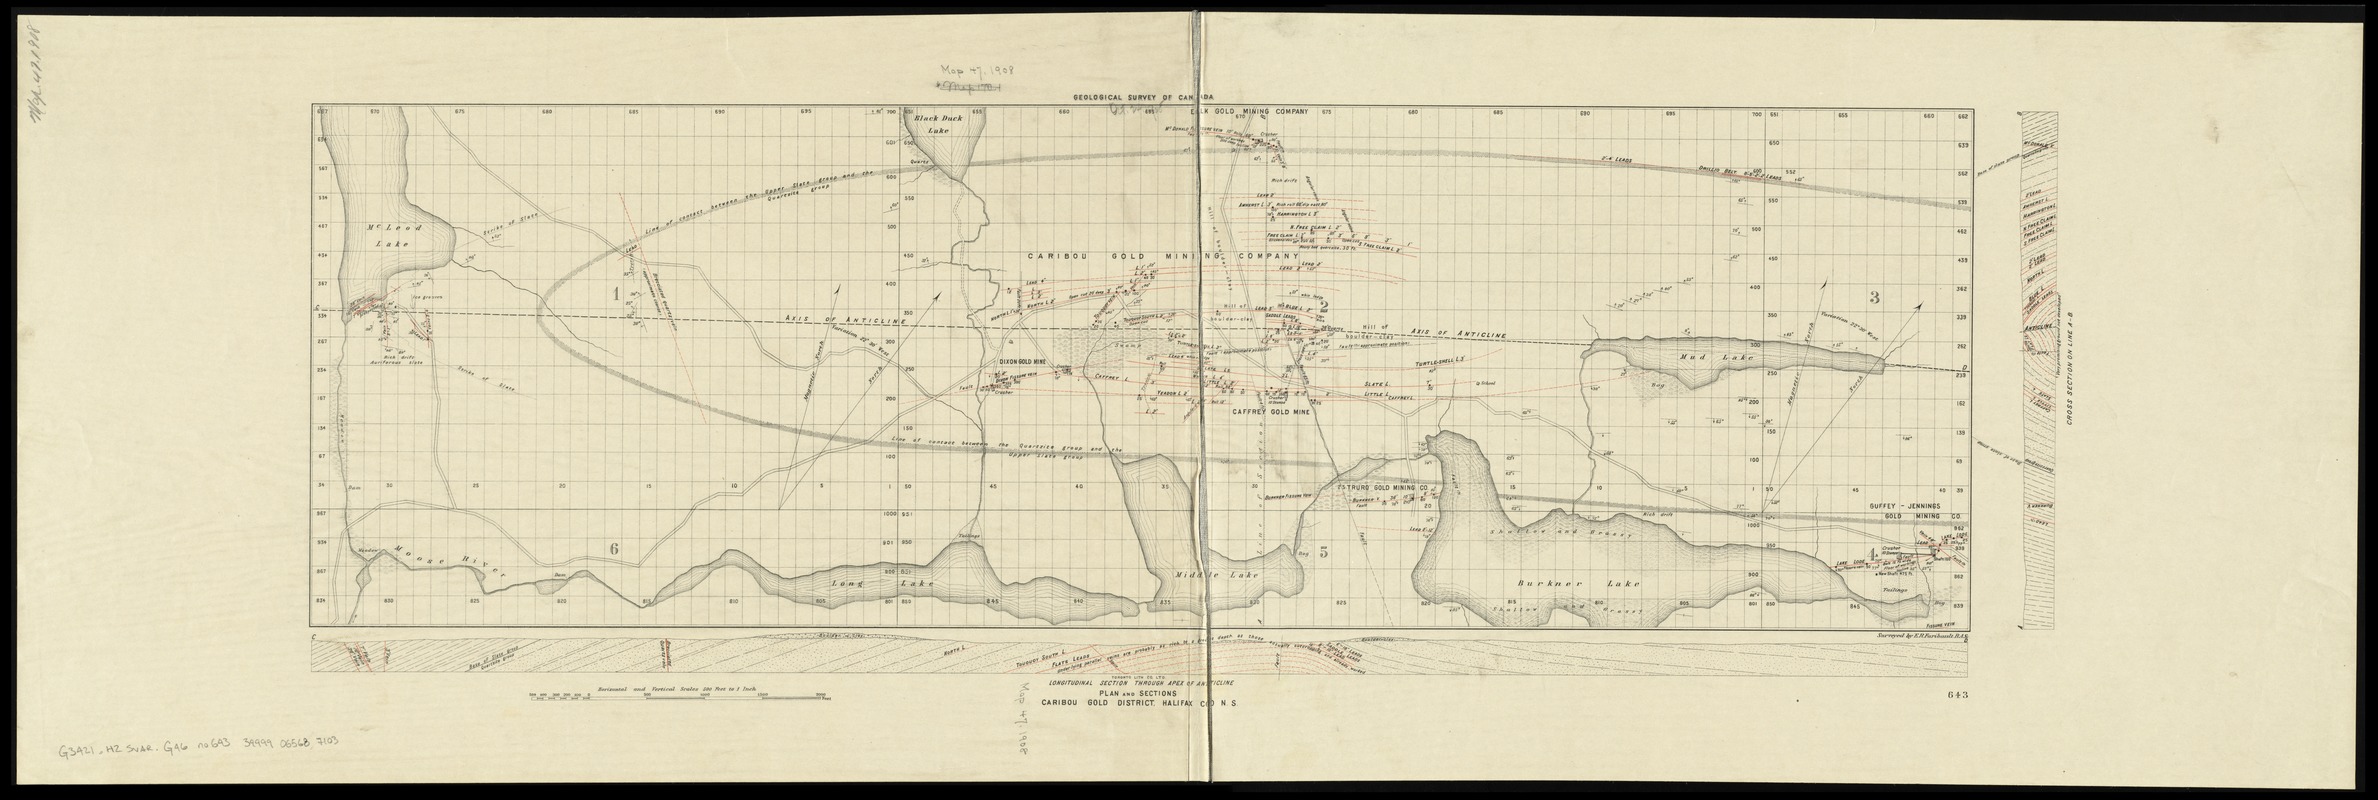 Plan and sections, Caribou gold district, Halifax Co., N.S